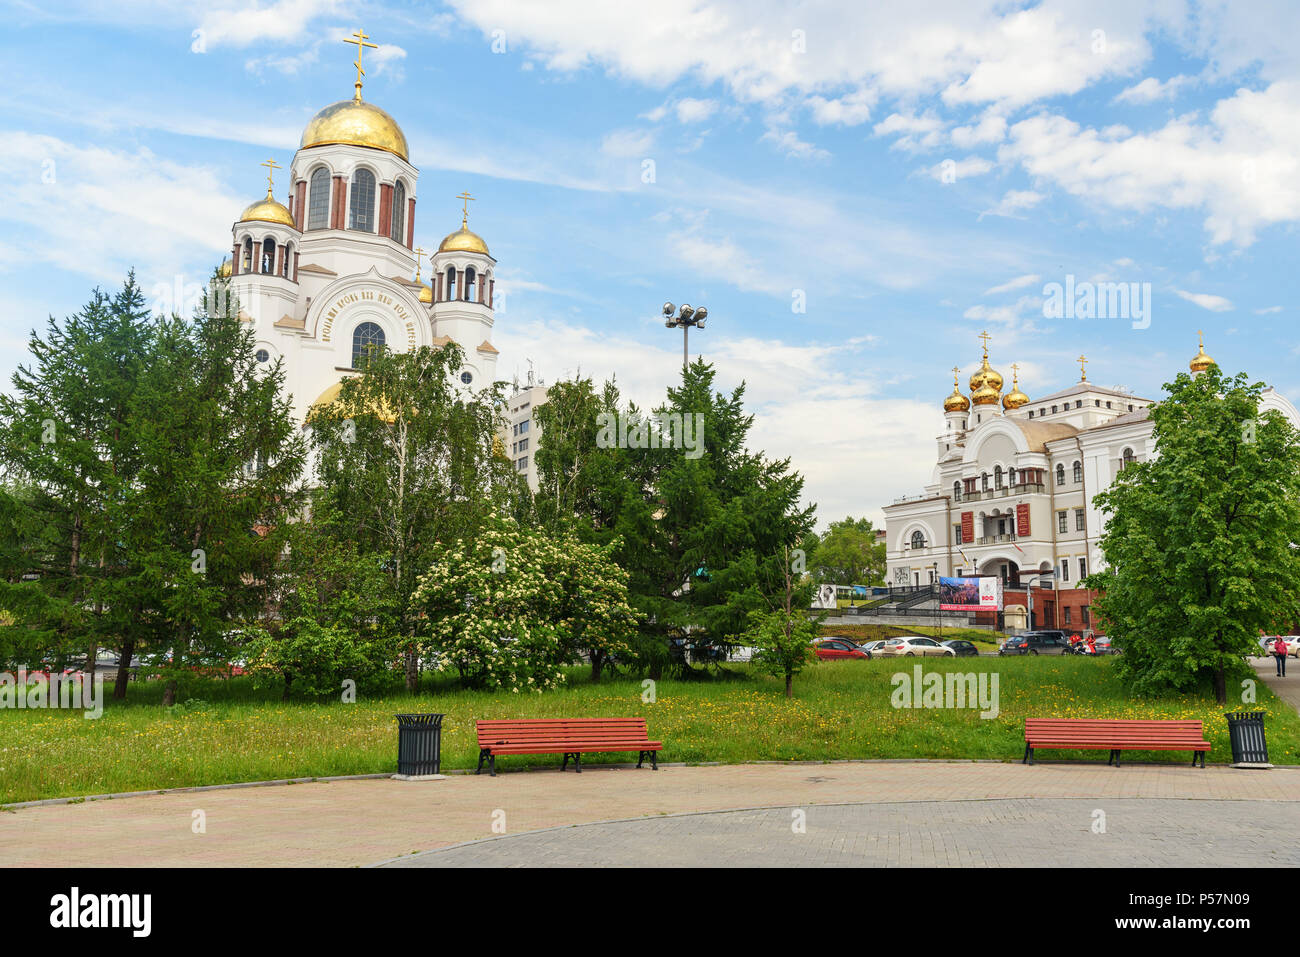 Yekaterinburg, Russia - June 21, 2018: View of Church on Blood in Honour of All Saints Stock Photo